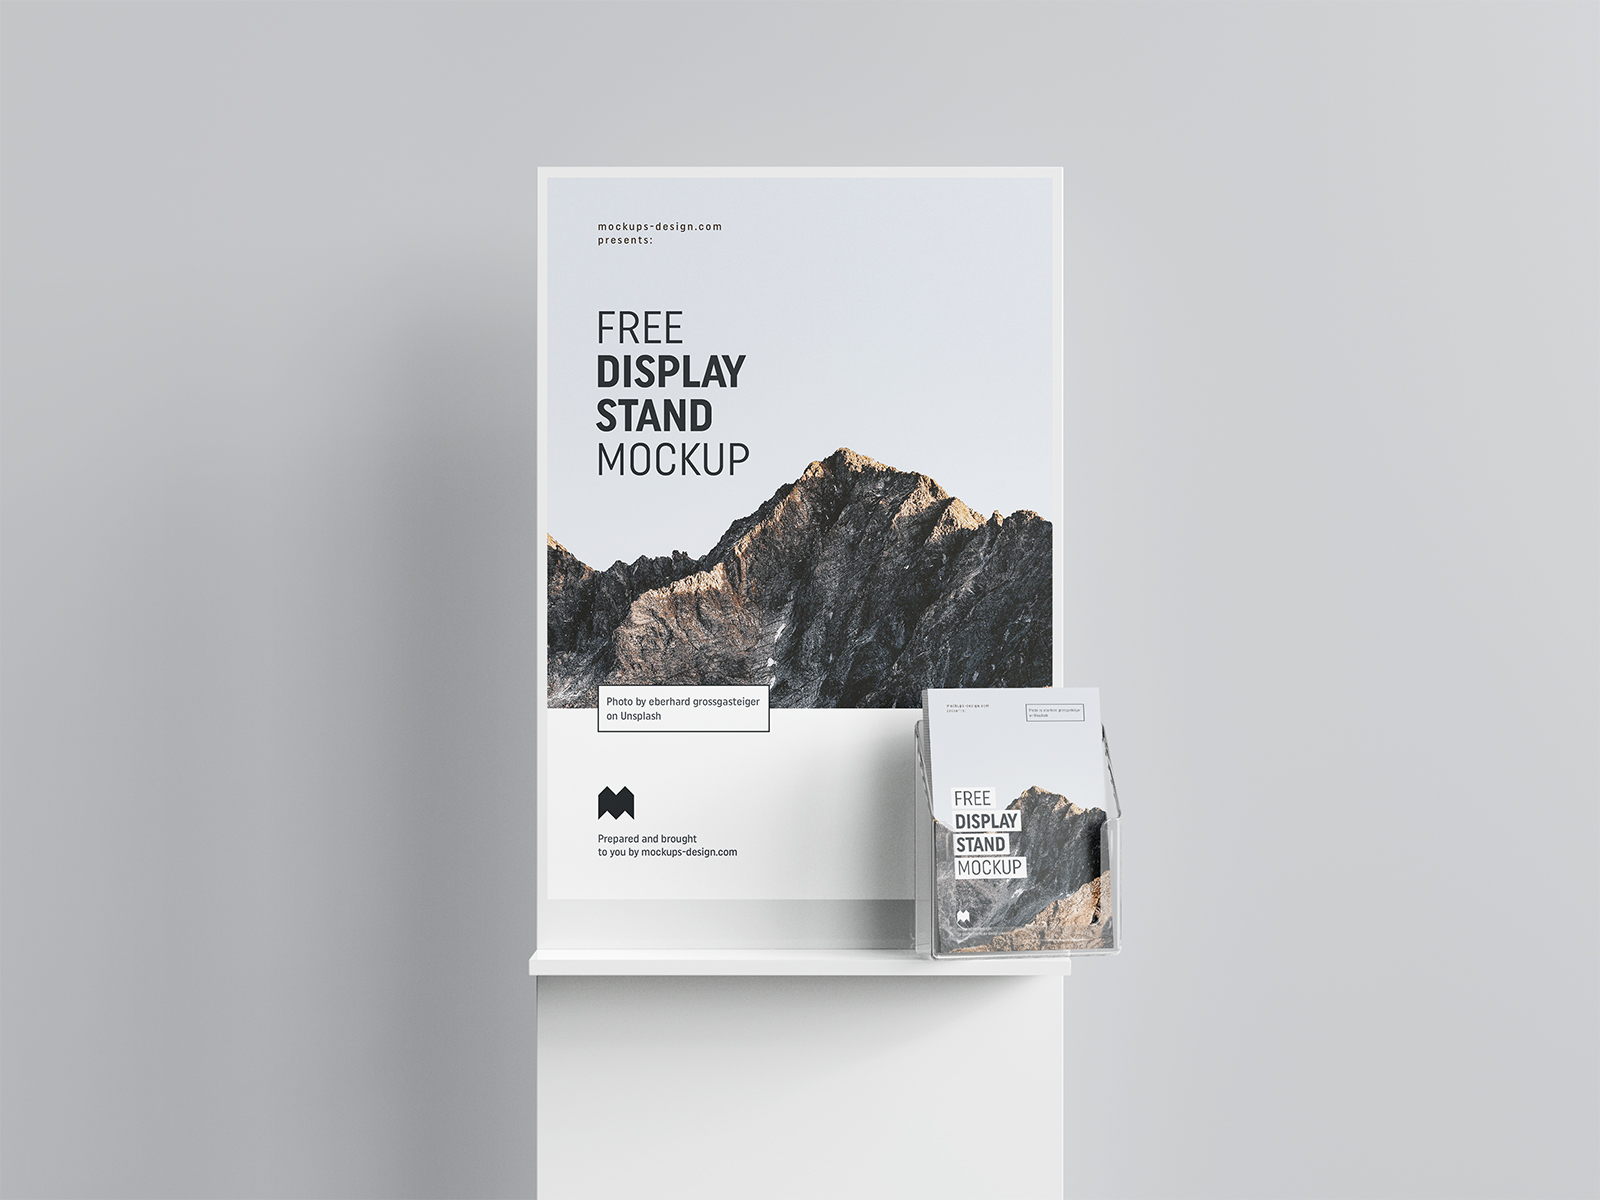 Free Poster Display with Flyers Mockup